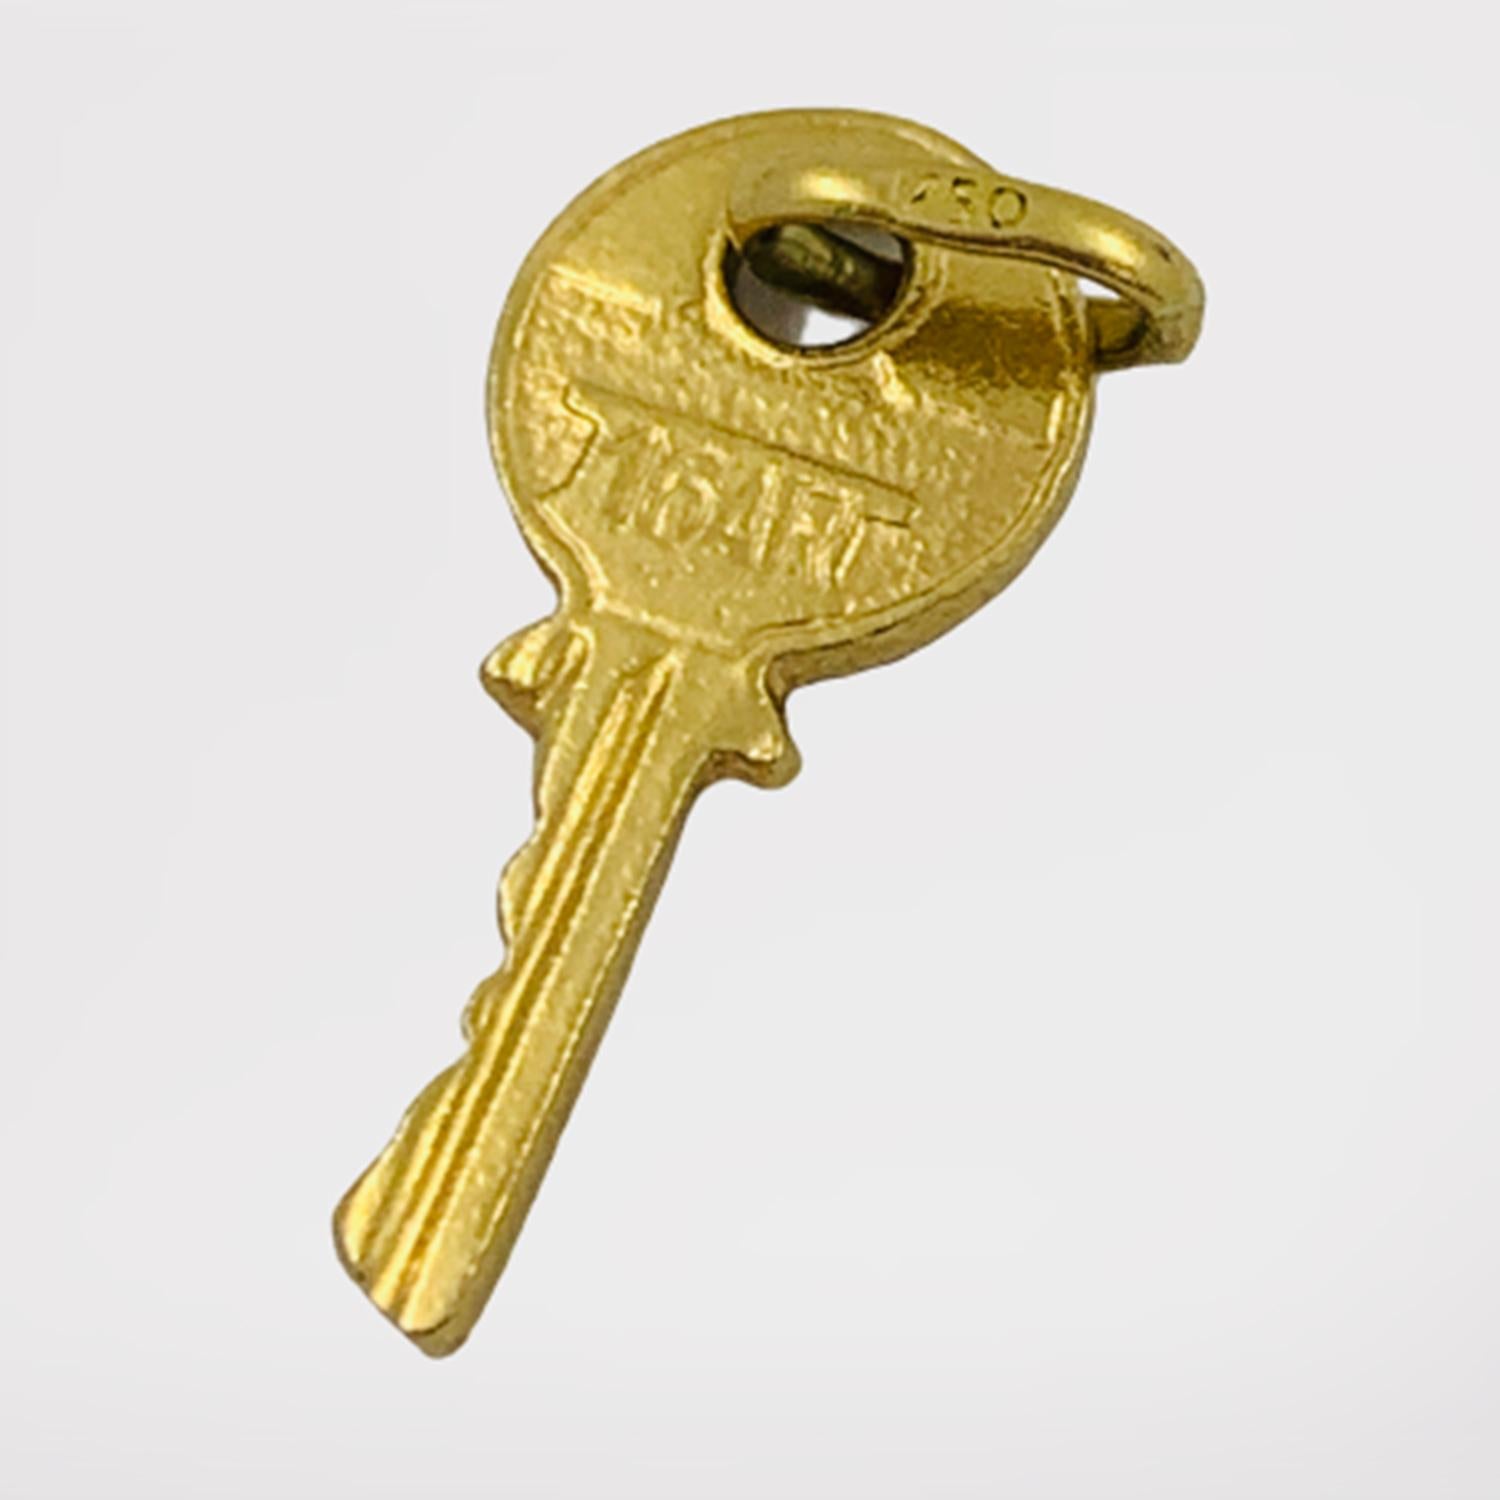 Vintage Key Shaped Charm Pendant Circa 1950-70's

Crafted of solid 18K yellow gold, this little charm will be the key to your heart. It's a perfect memory marker for first time home buyers, or your time living in a special home. The key is engraved